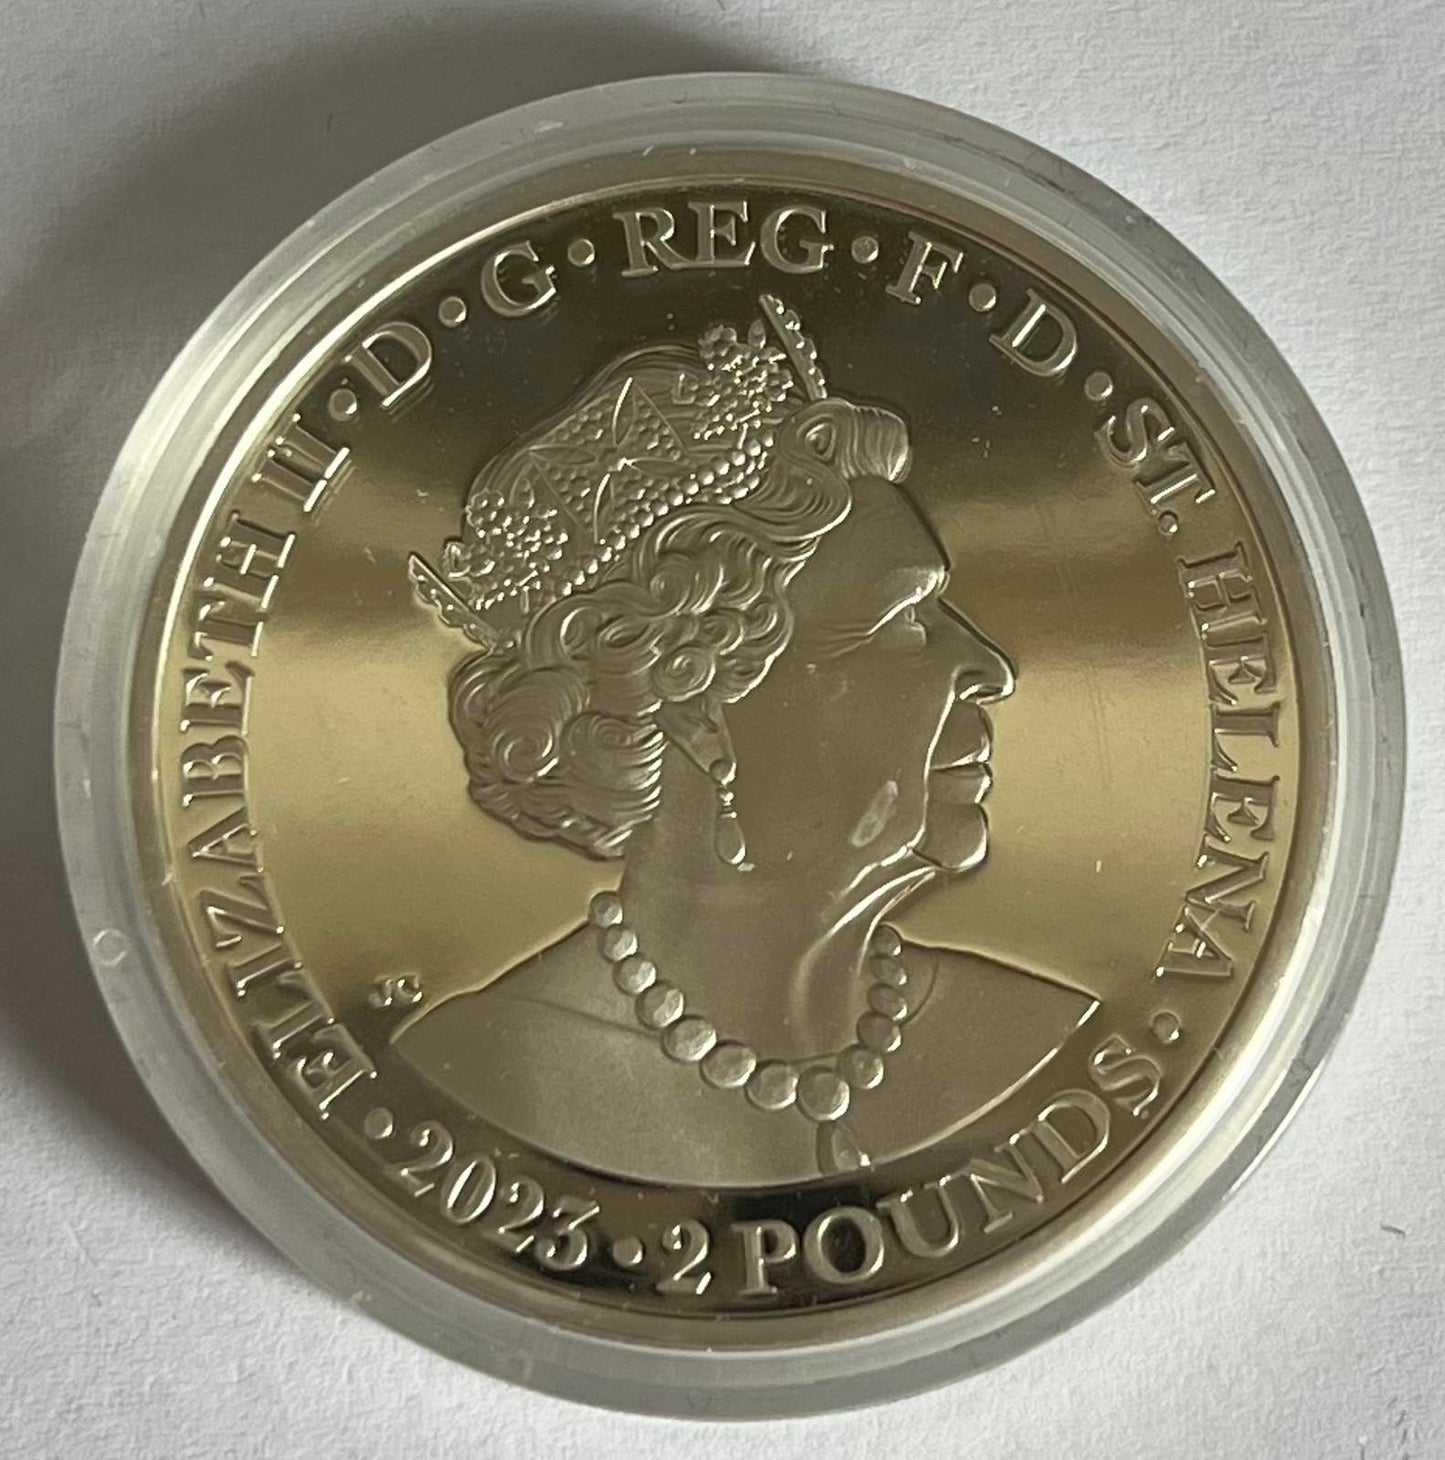 2023 St. Helena 2 oz Silver Faerie Queene Una & Lion Proof (Gilded) (note: with crack on capsule)